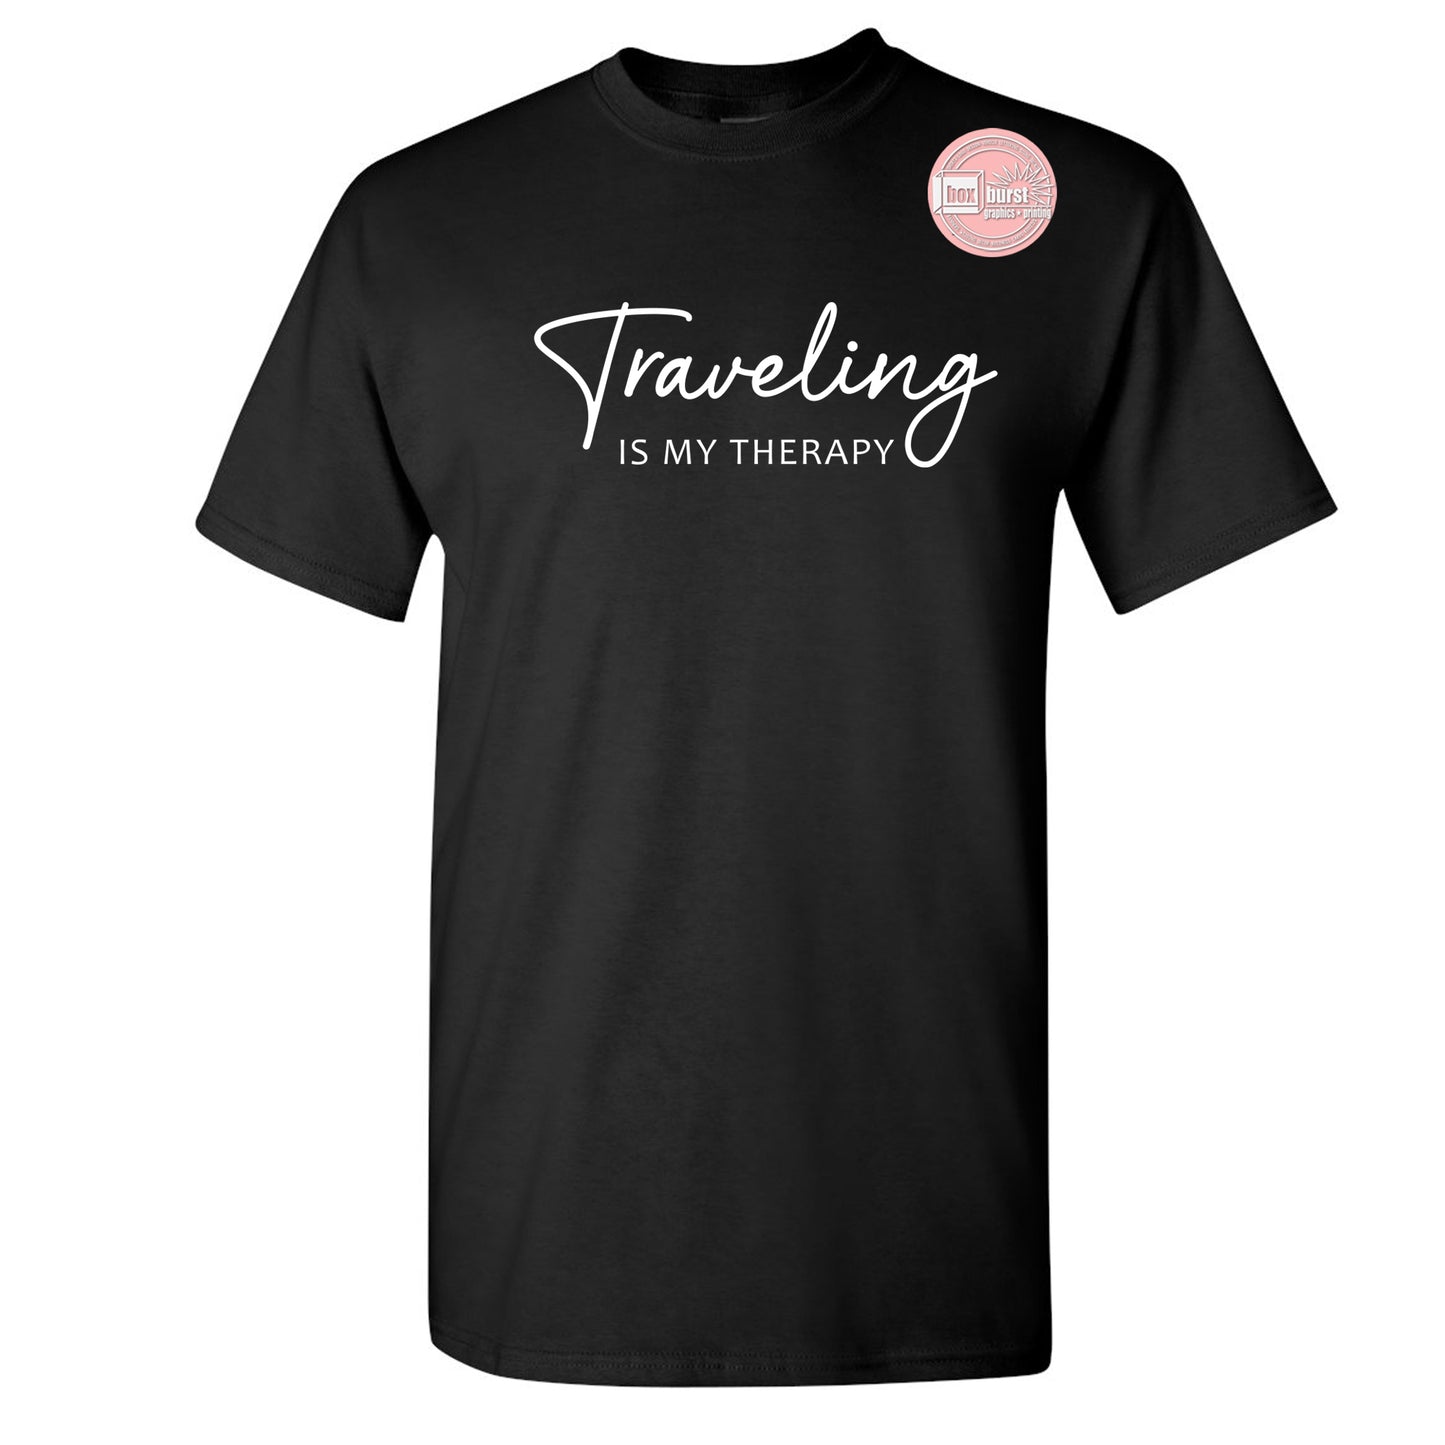 Travel Therapy shirt